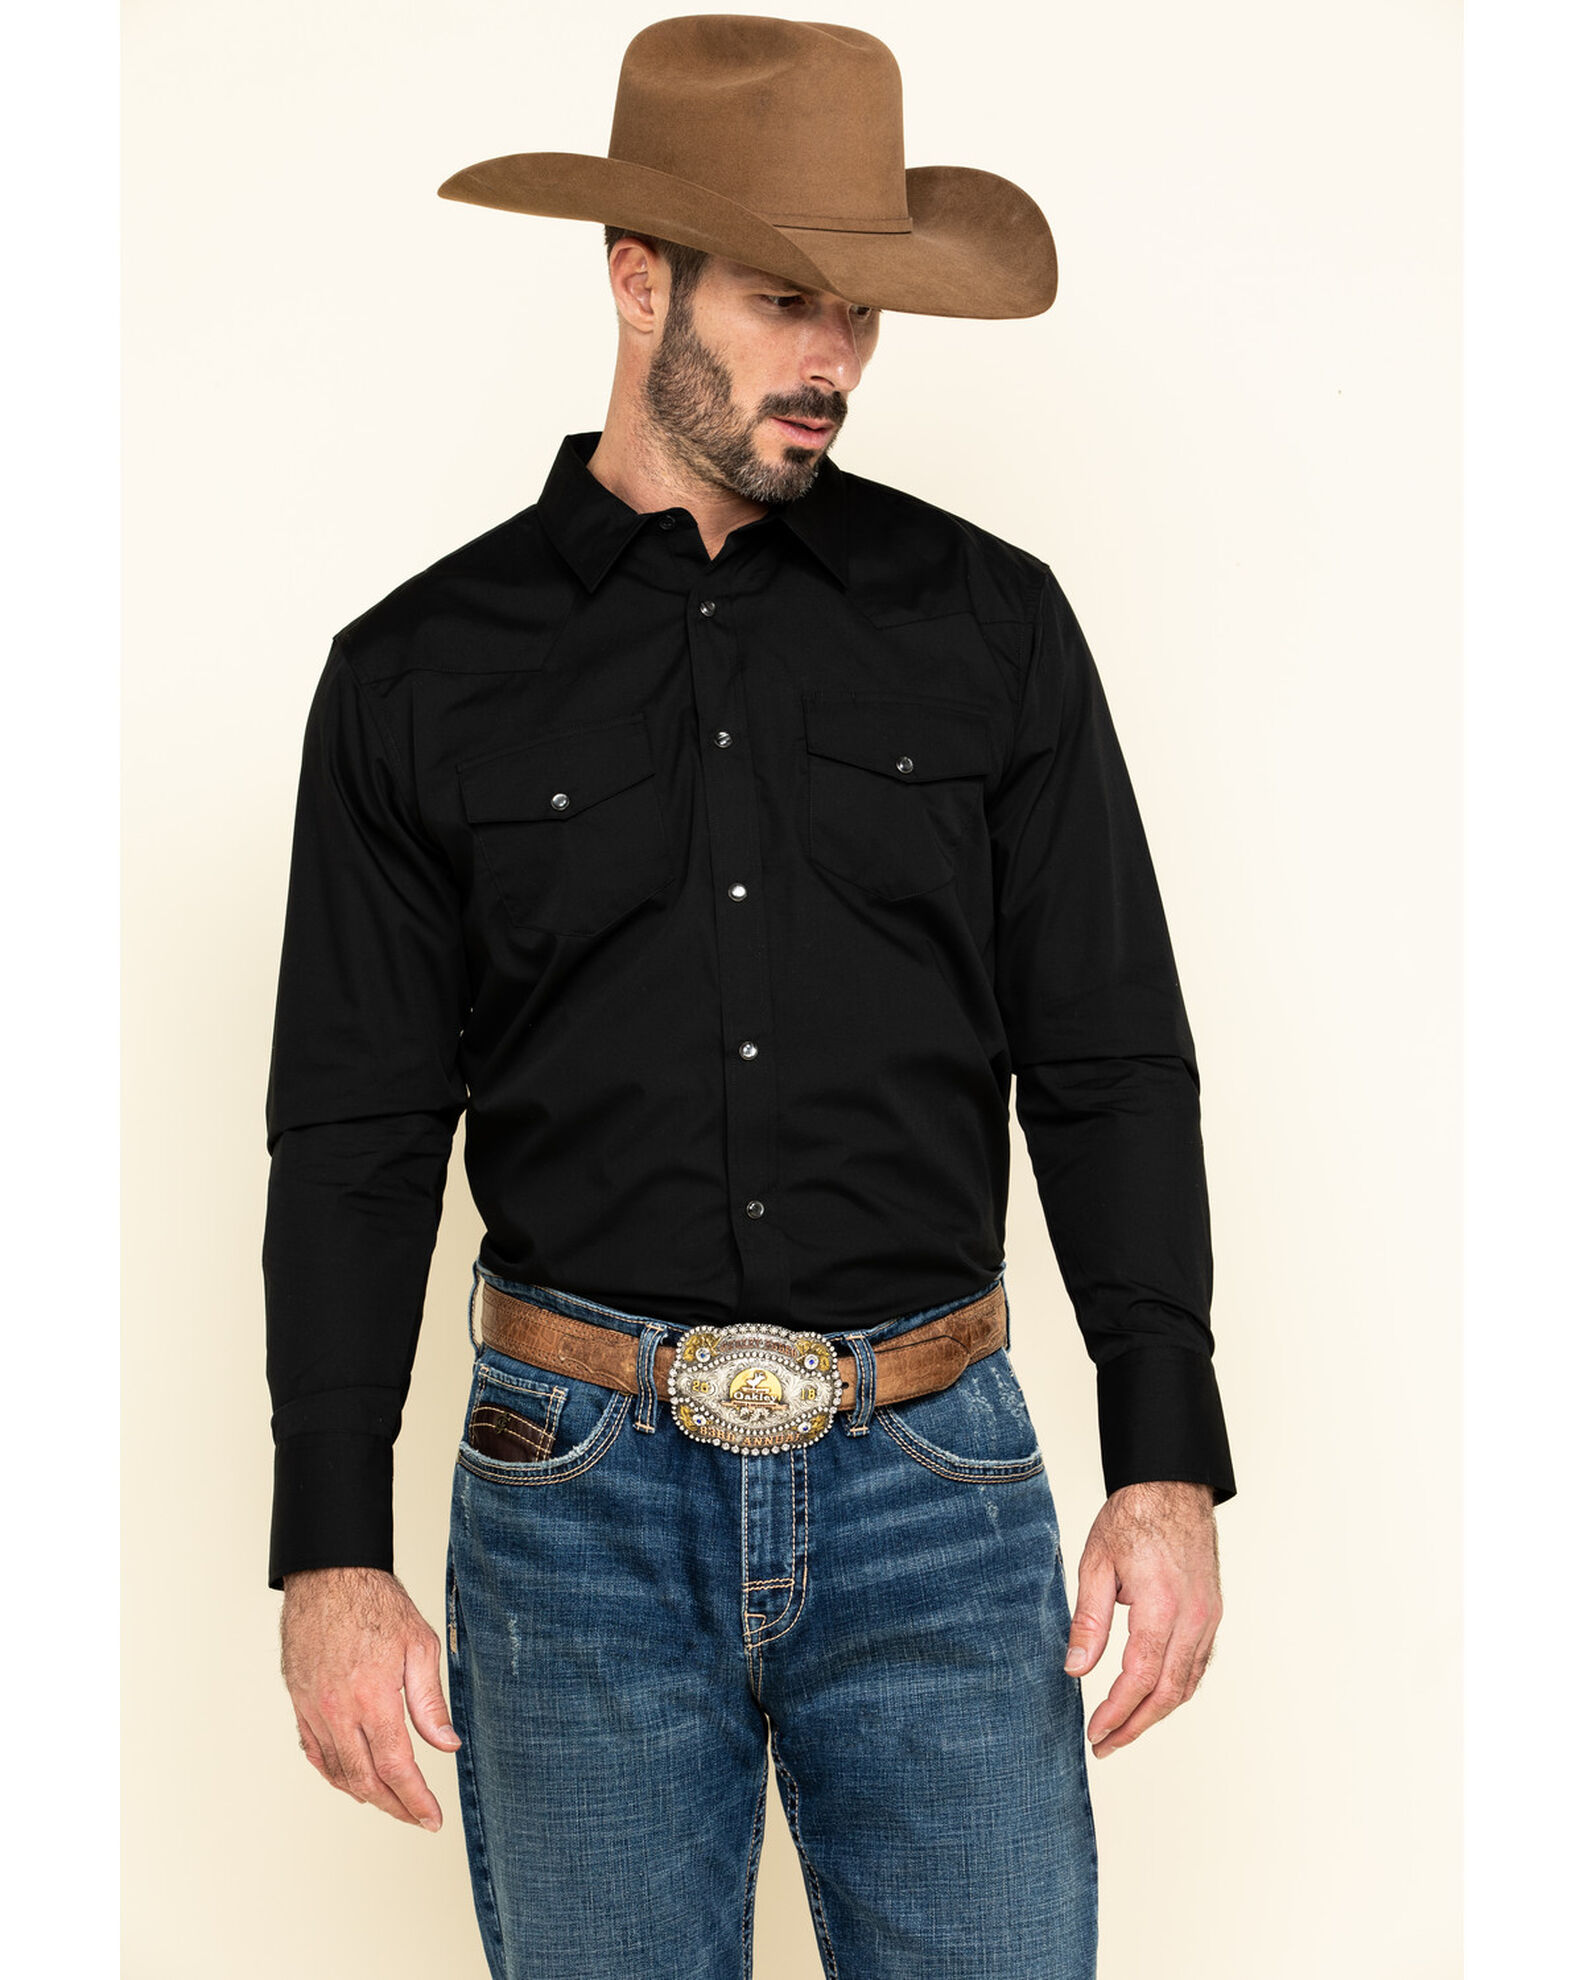 Fvwitlyh Custom Shirts for Men Men's Western Cowboy Long Sleeve Pearl Snap Casual Work Shirts, Size: Large, Black